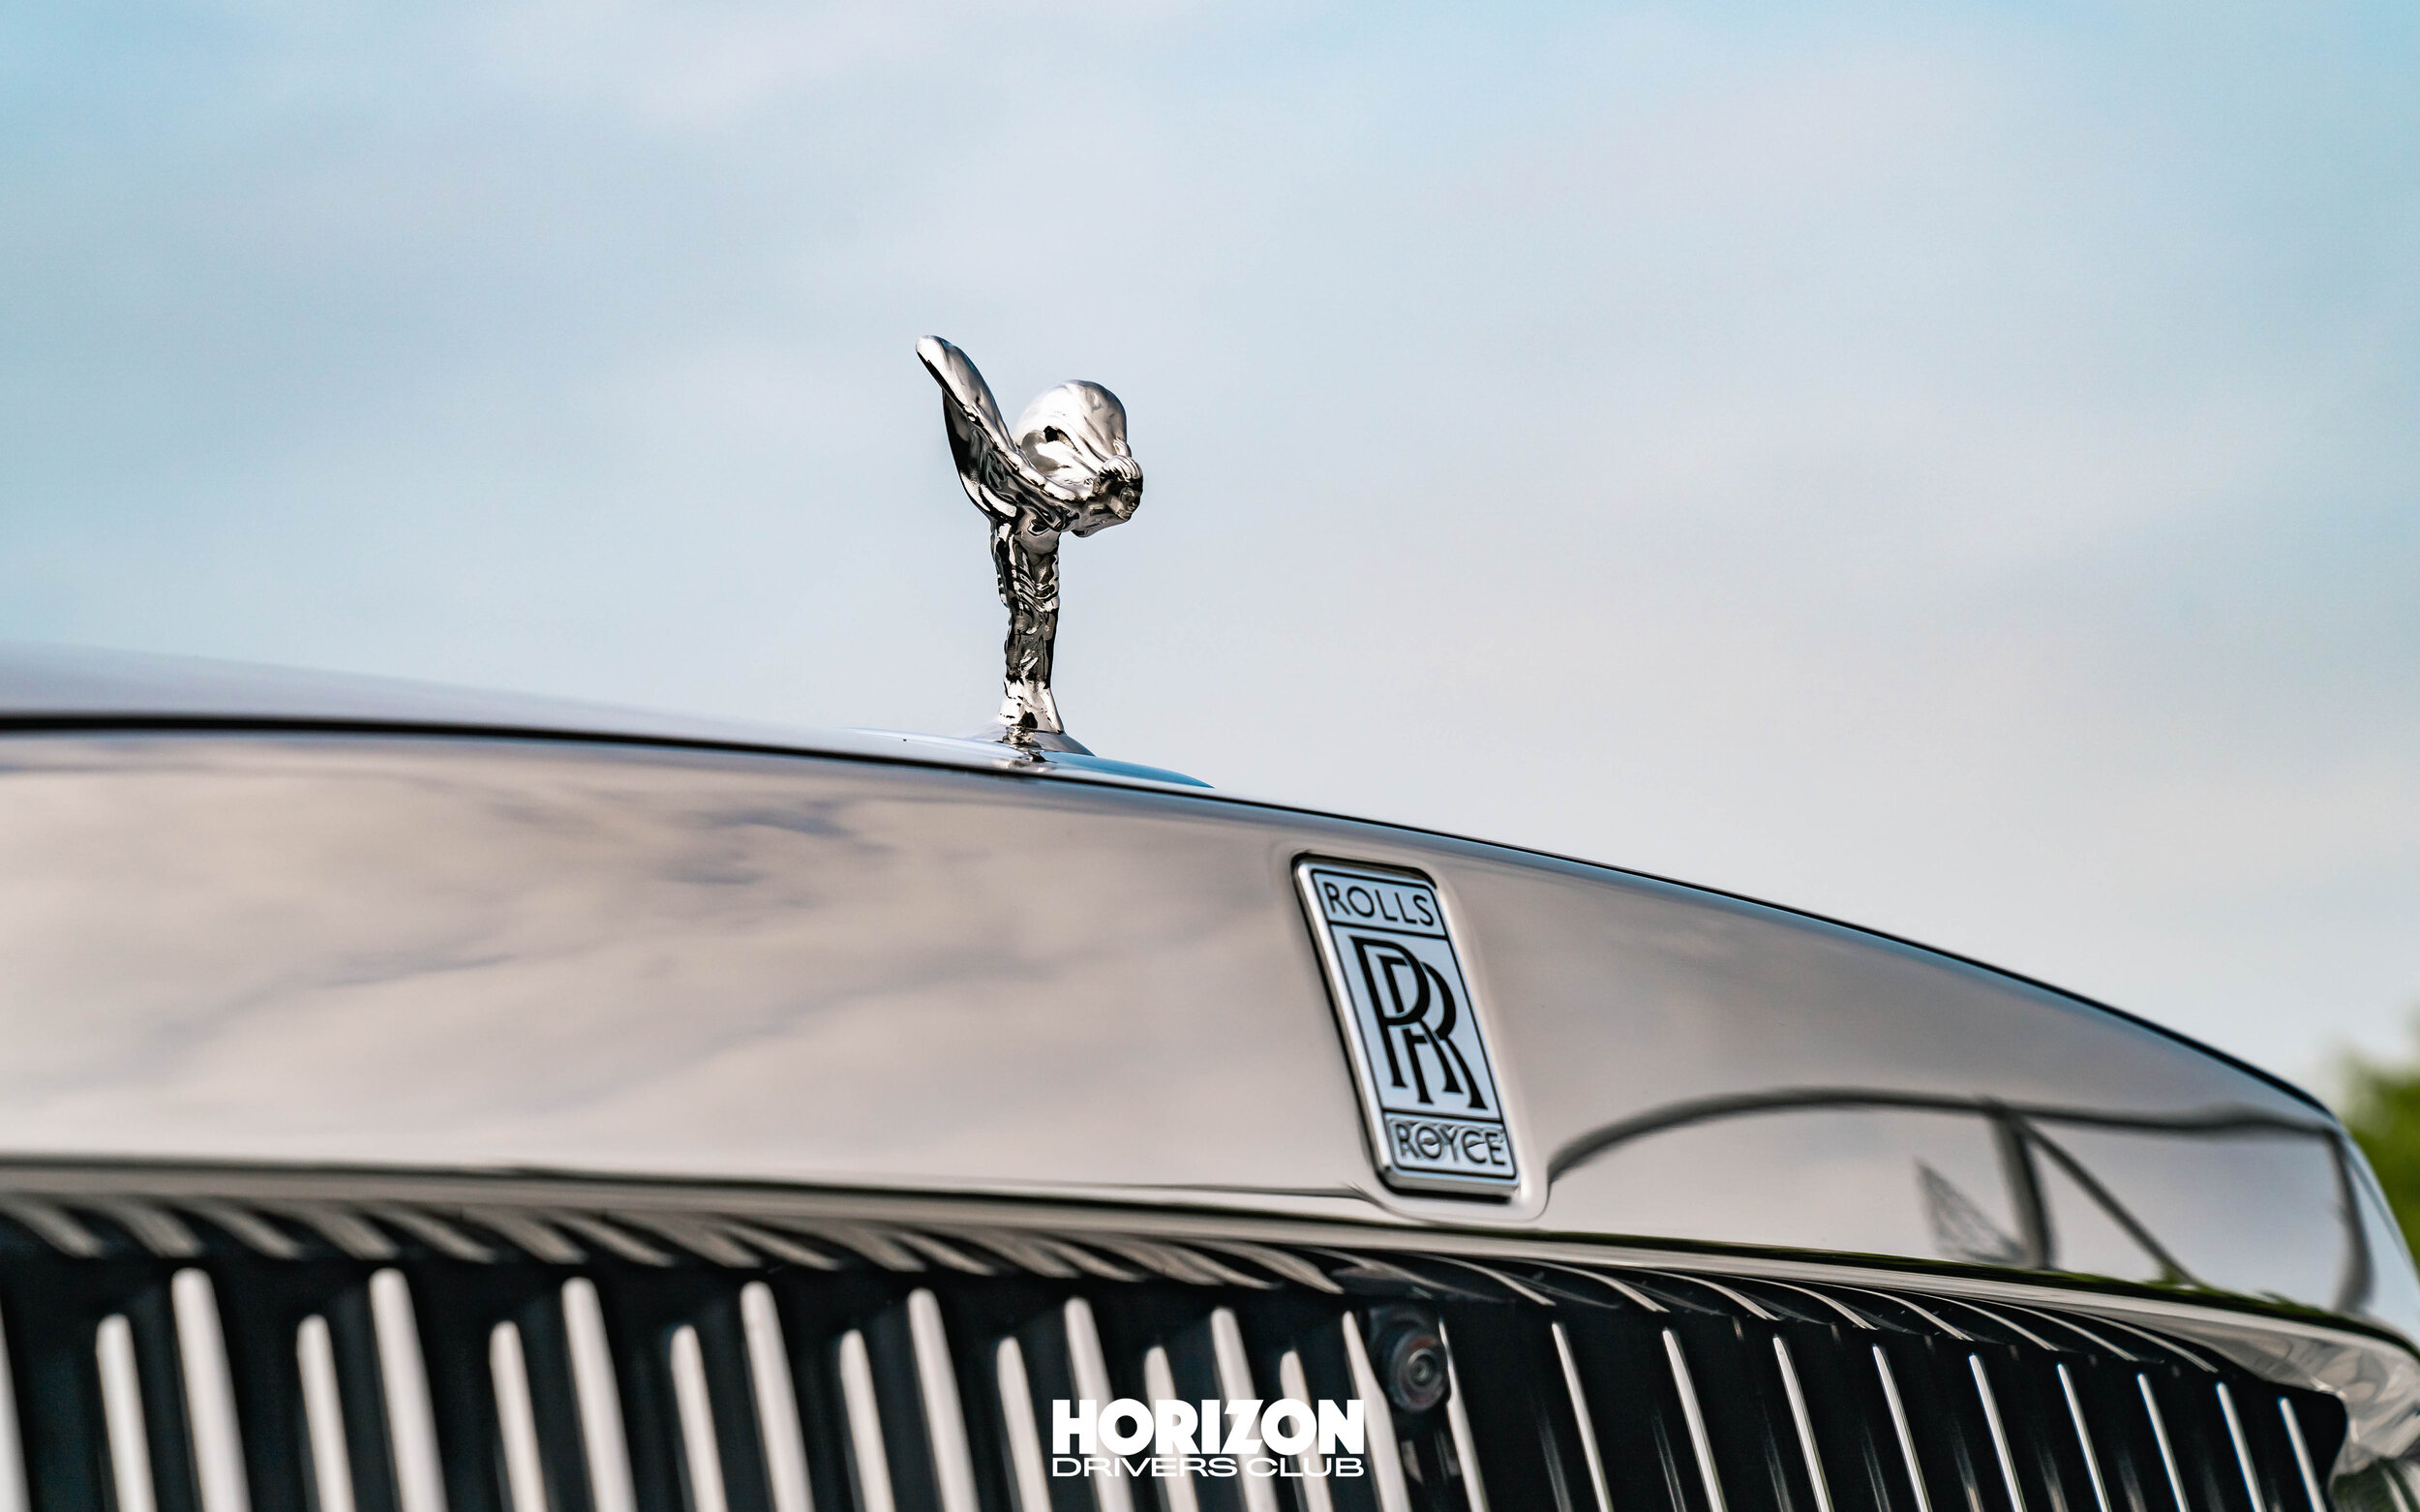 2021 Rolls-Royce Ghost: Who Are You Calling A Minimalist? — Horizon Drivers  Club